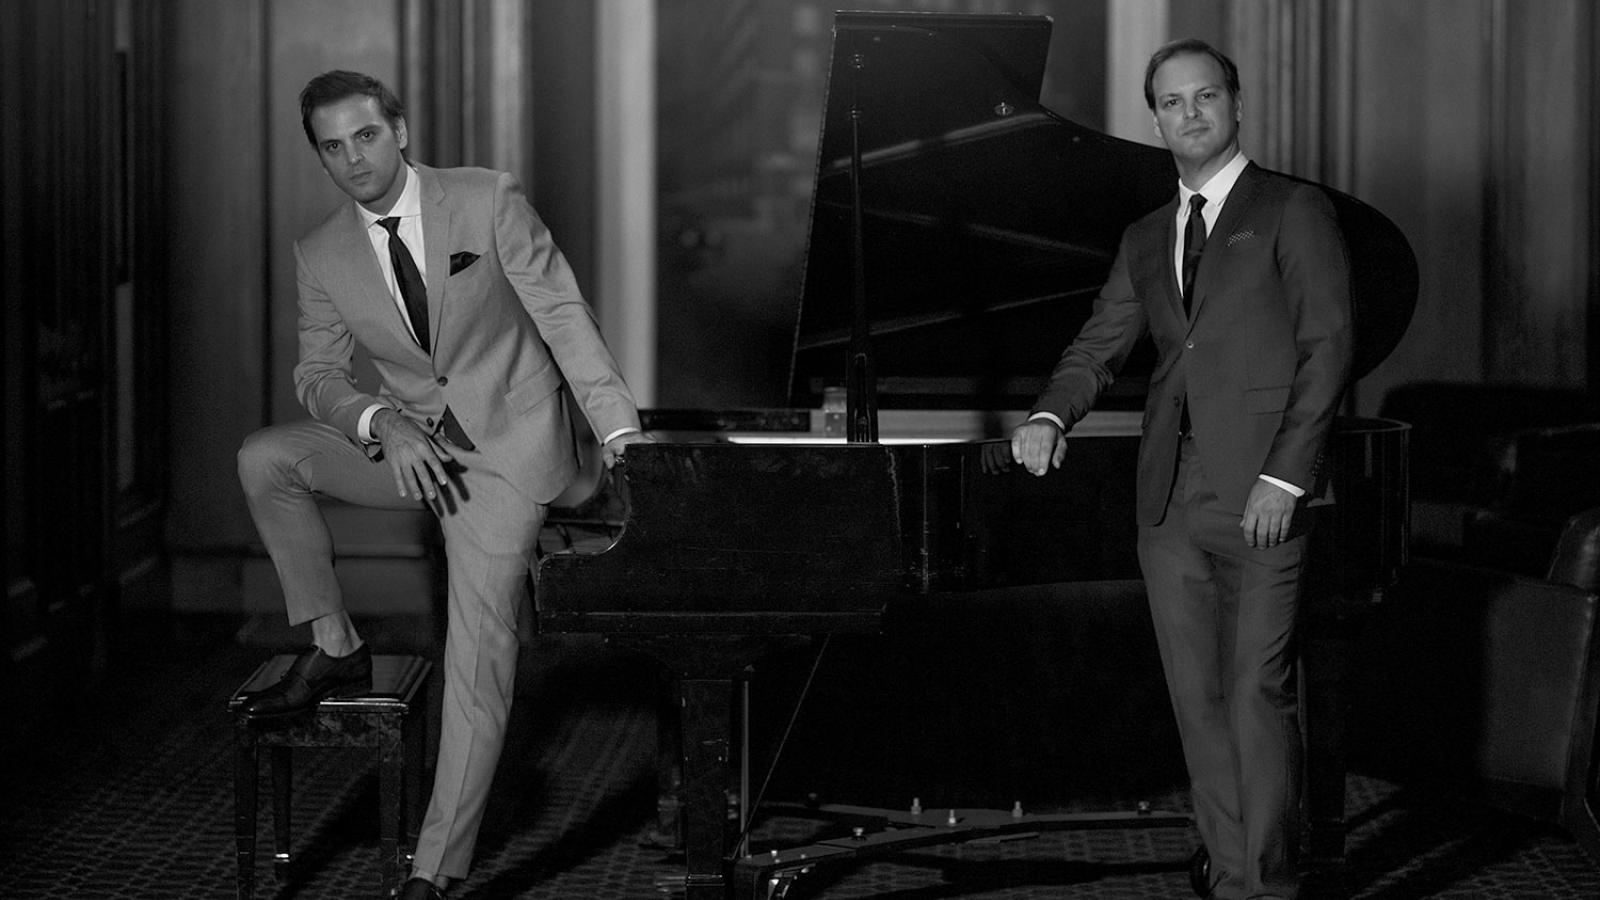 The Alonso Brothers posing with a grand piano